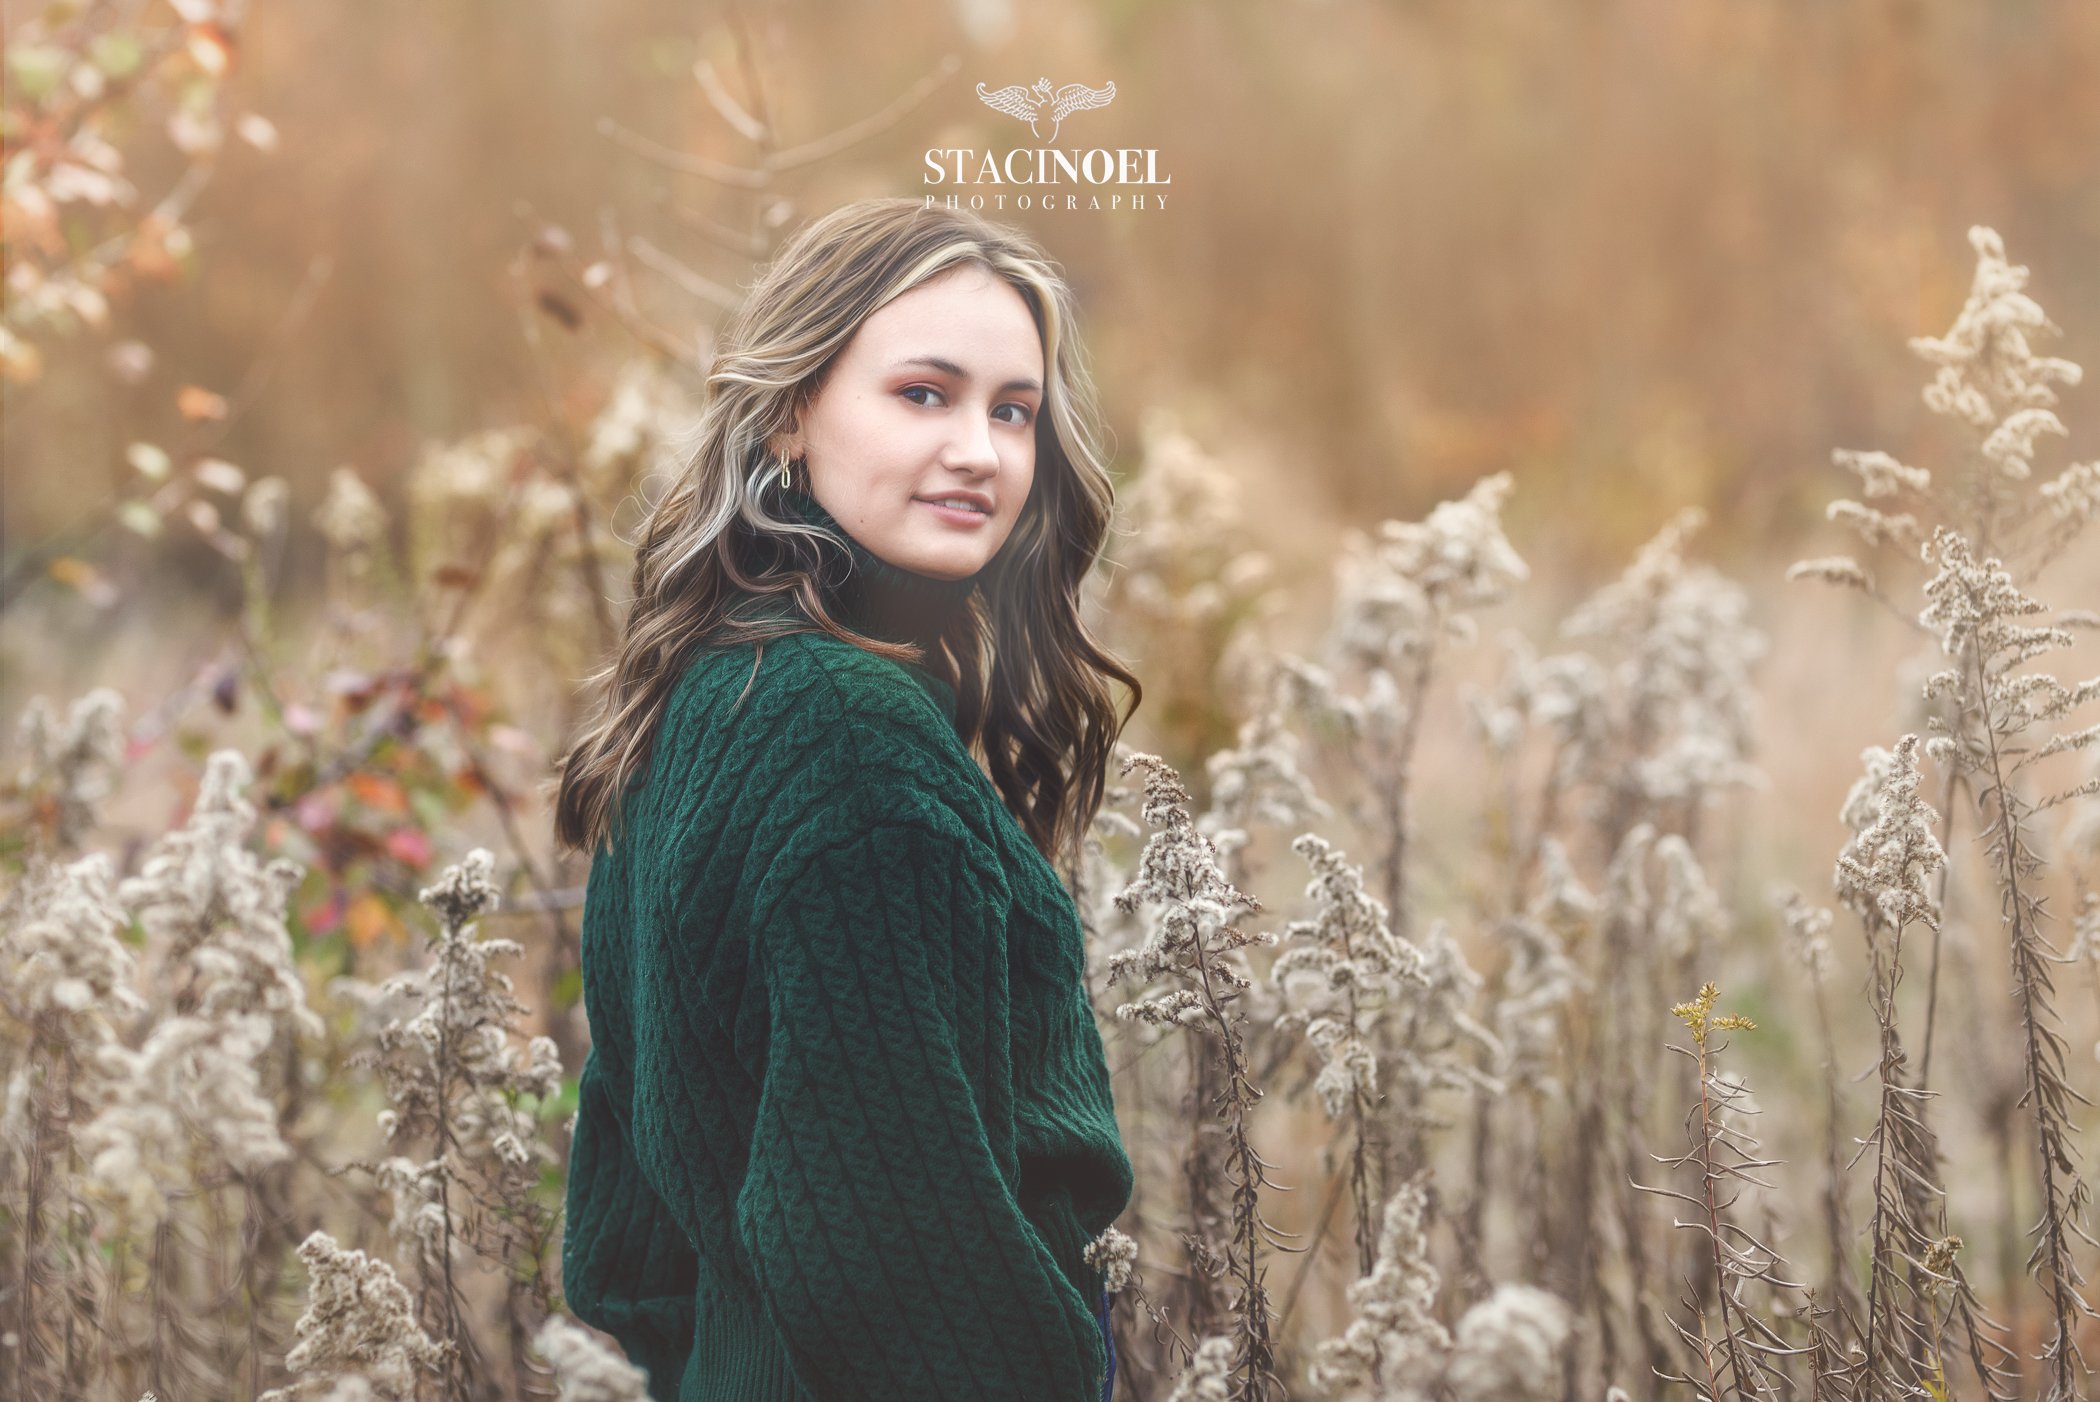 Charlotte senior photographer Staci Noel photography captures a fall senior session in tall grass with autumn colors and high school senior girl in beautiful outdoor setting